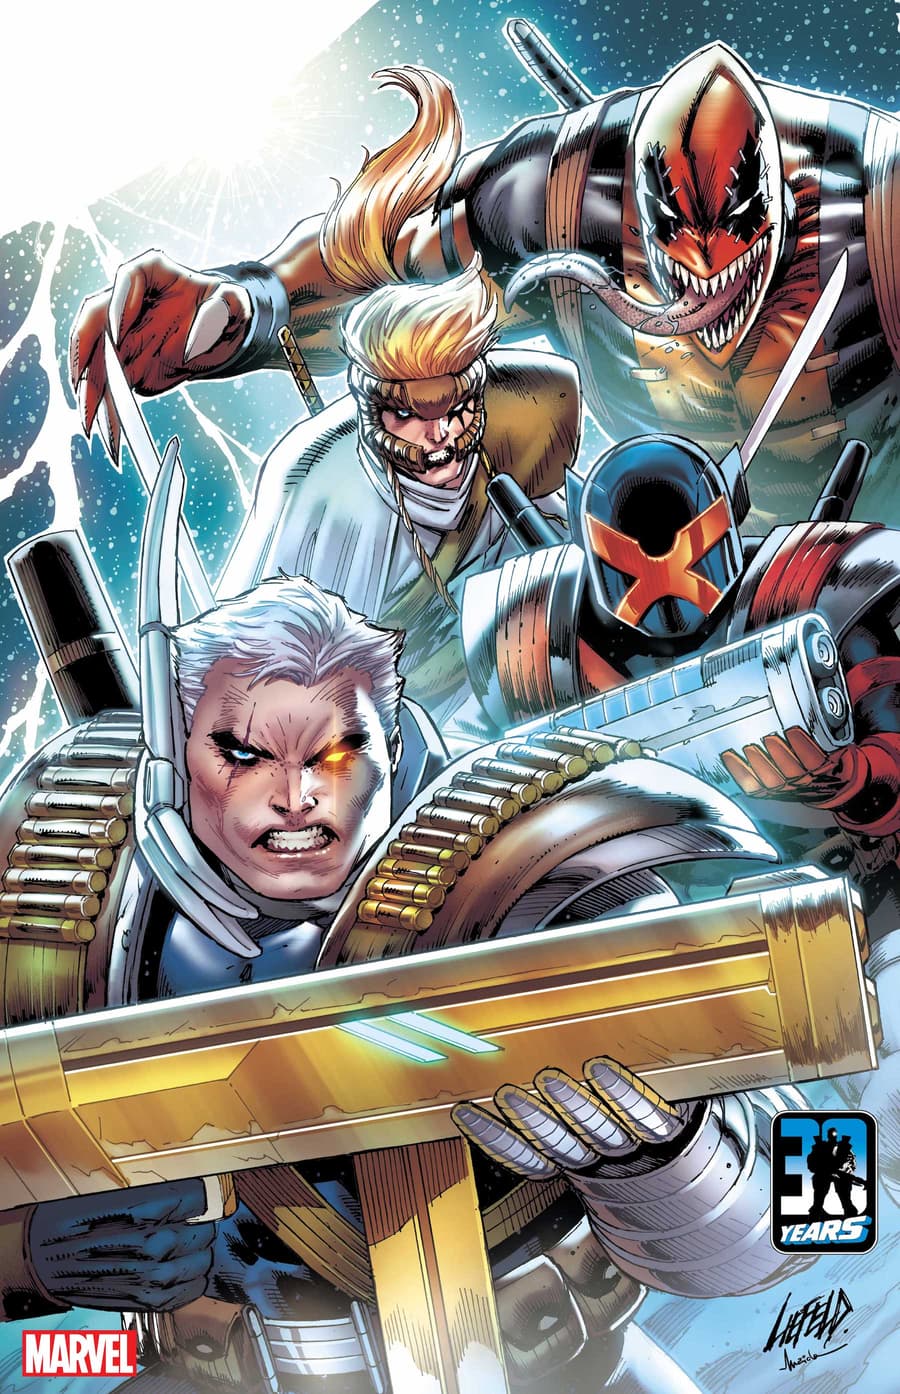 X-FORCE: KILLSHOT #1 cover by Rob Liefeld